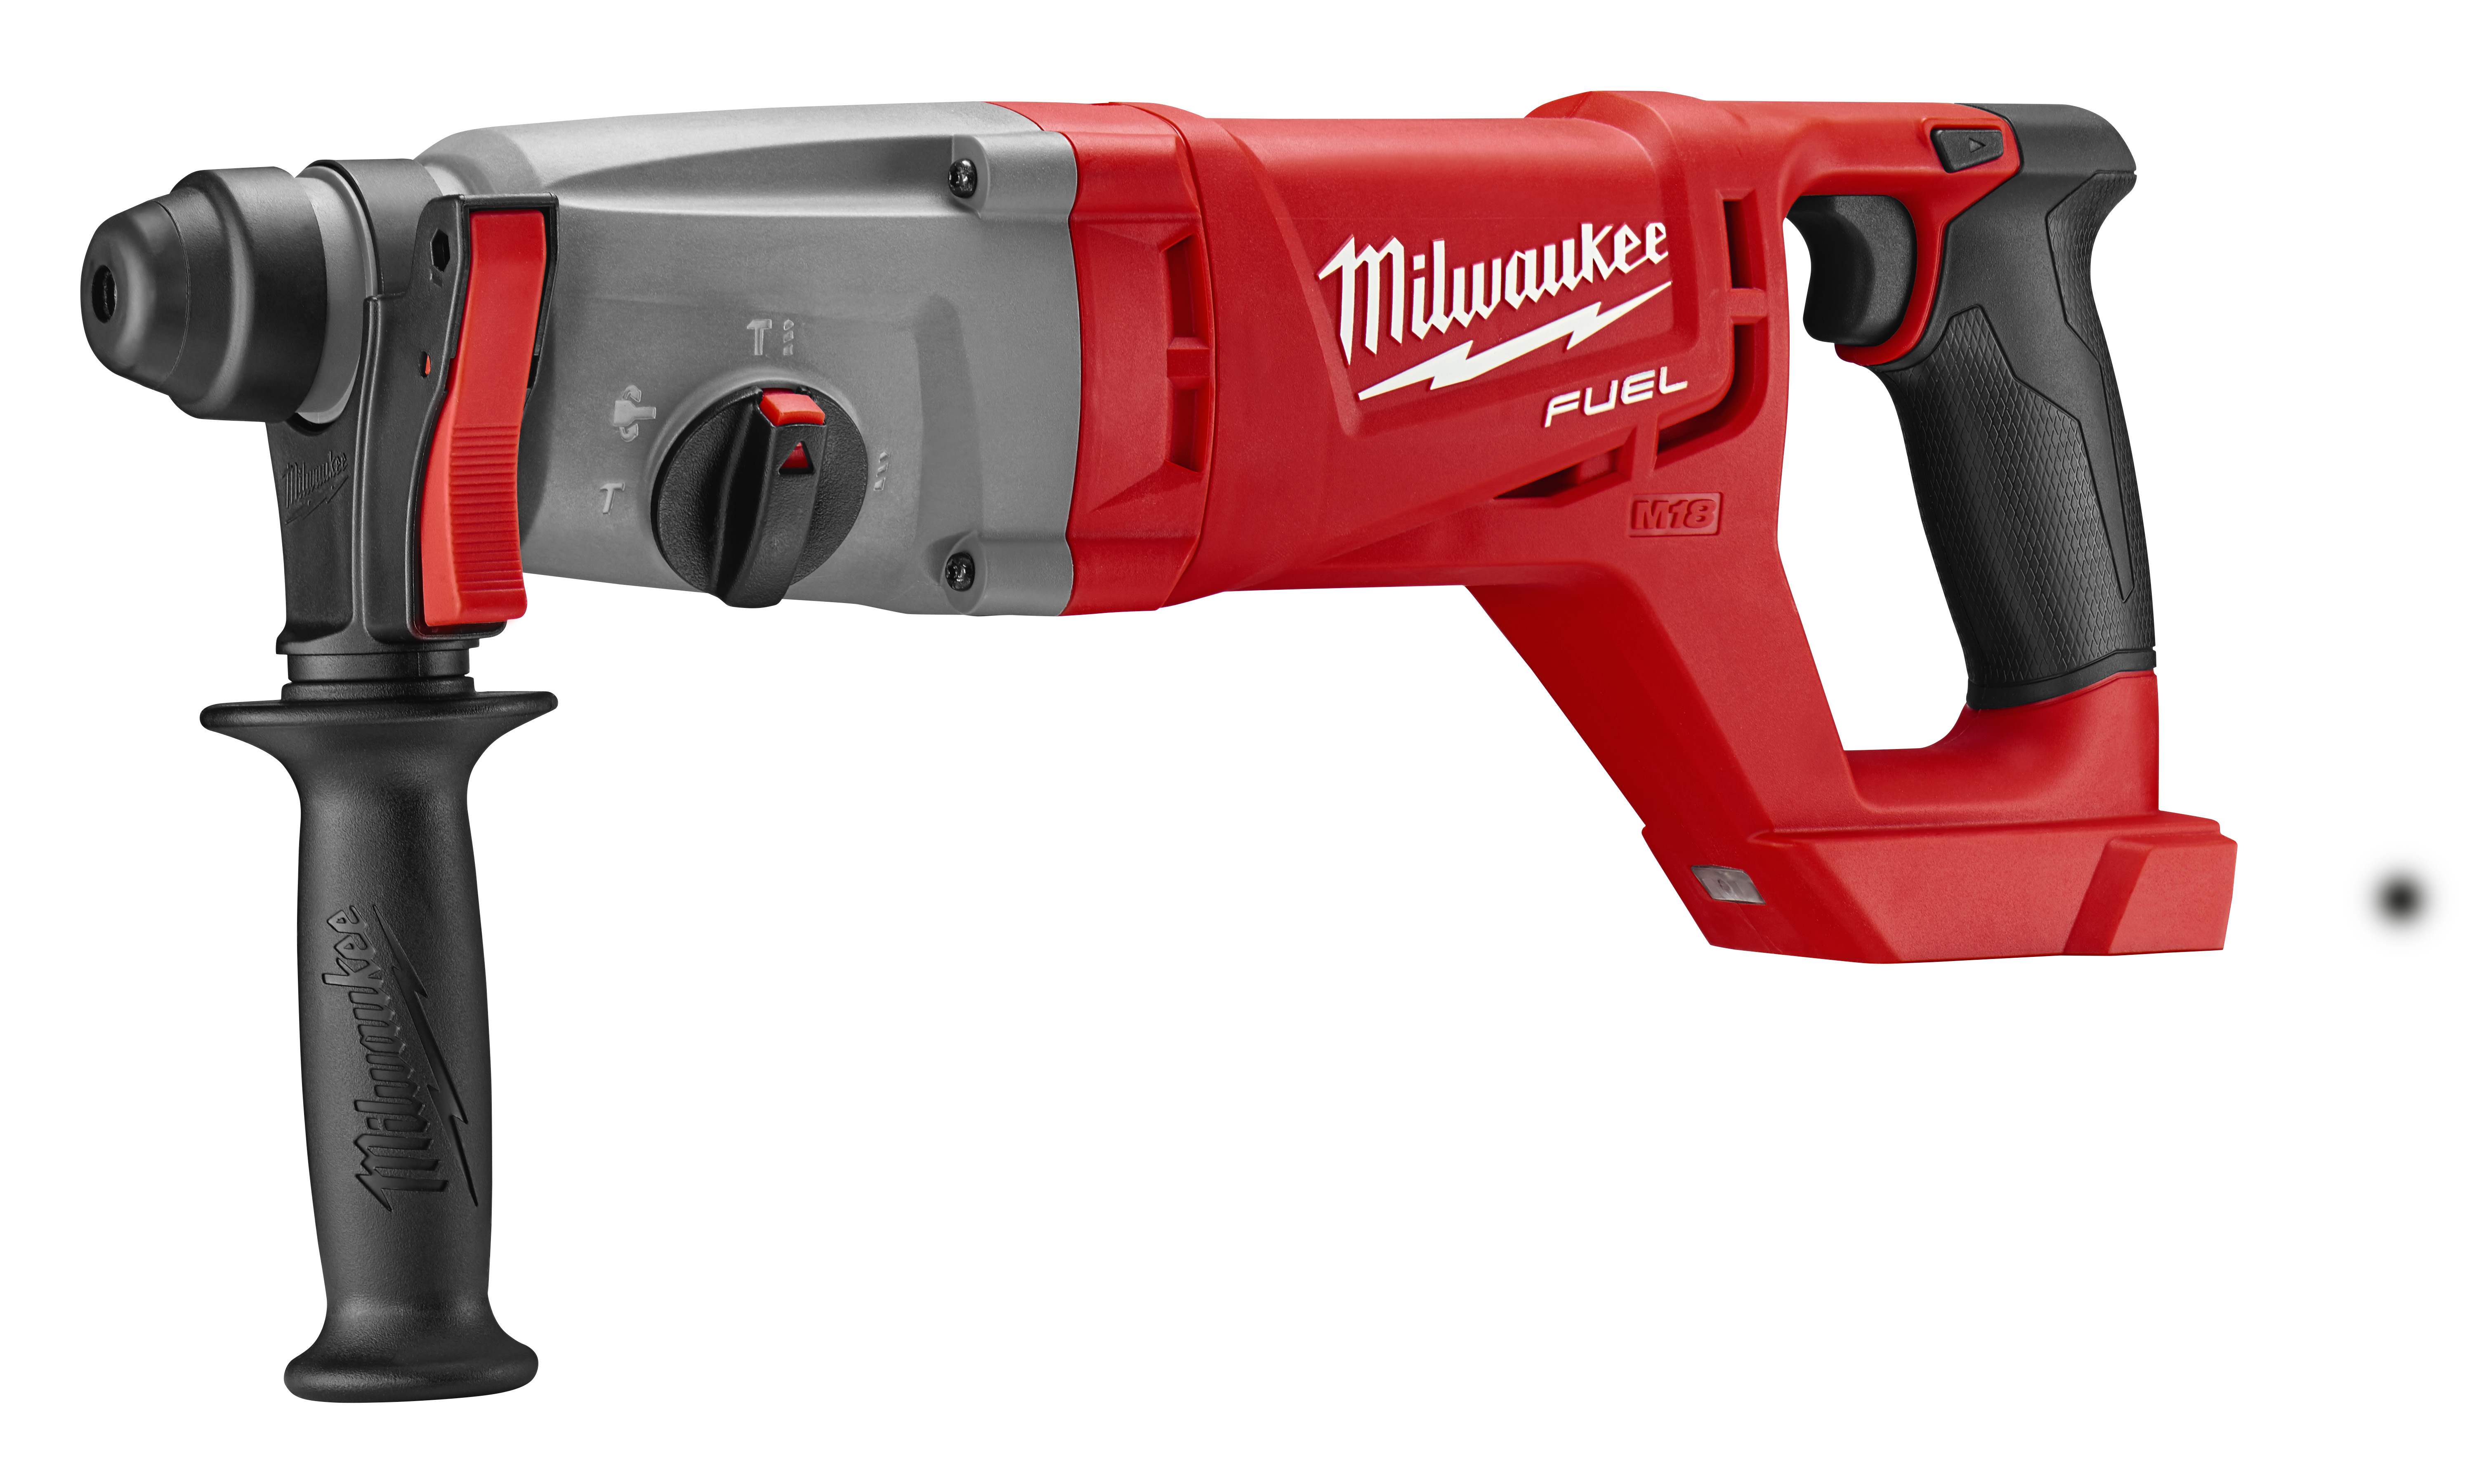 Powered by FUEL™ technology, the M18 FUEL™ 1 in. SDS plus D-handle rotary hammer delivers faster than corded speed, corded durability and all day work on one charge. The Milwaukee POWERSTATE brushless motor provides 2.1 ft. lbs of impact energy, 0-1, 500 RPM and 0-4,400 BPM. The Milwaukee REDLITHIUM XC 5.0 battery packs (not included) provide all day work on one charge, 20% more power and 2X more recharges than standard lithium-ion batteries. REDLINK PLUS intelligence integrates full-circle communication between tool, battery and charger to protect from overloading, overheating and over-discharging.